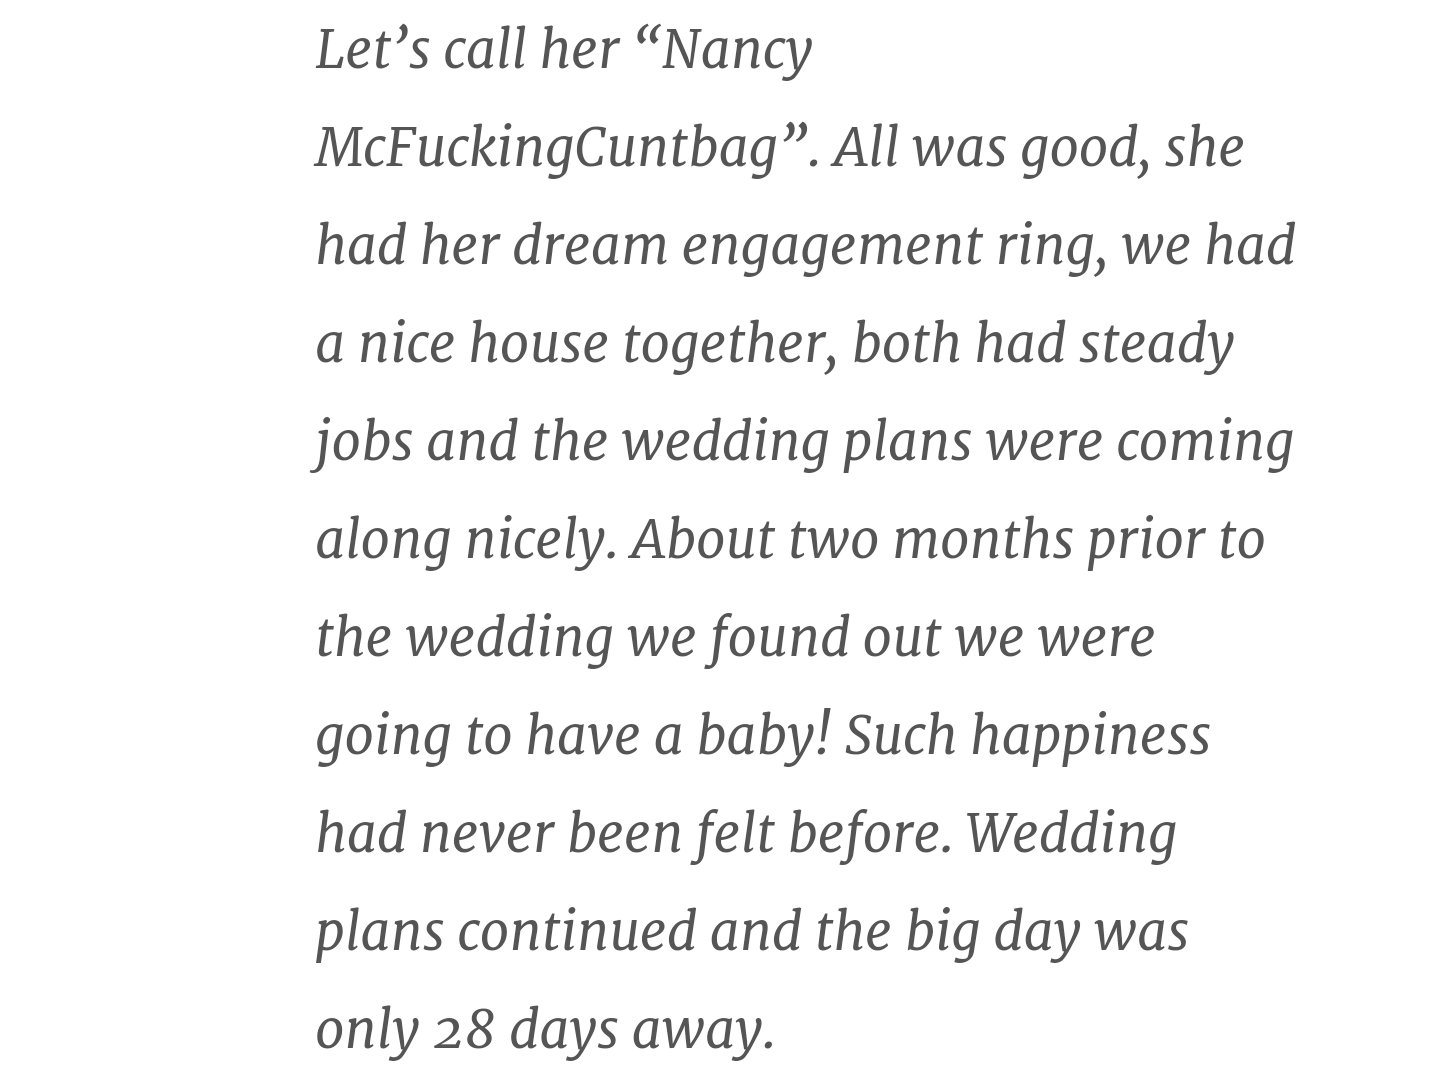 angle - Let's call her Nancy McFuckingCuntbag. All was good, she had her dream engagement ring, we had a nice house together, both had steady jobs and the wedding plans were coming along nicely. About two months prior to the wedding we found out we were g